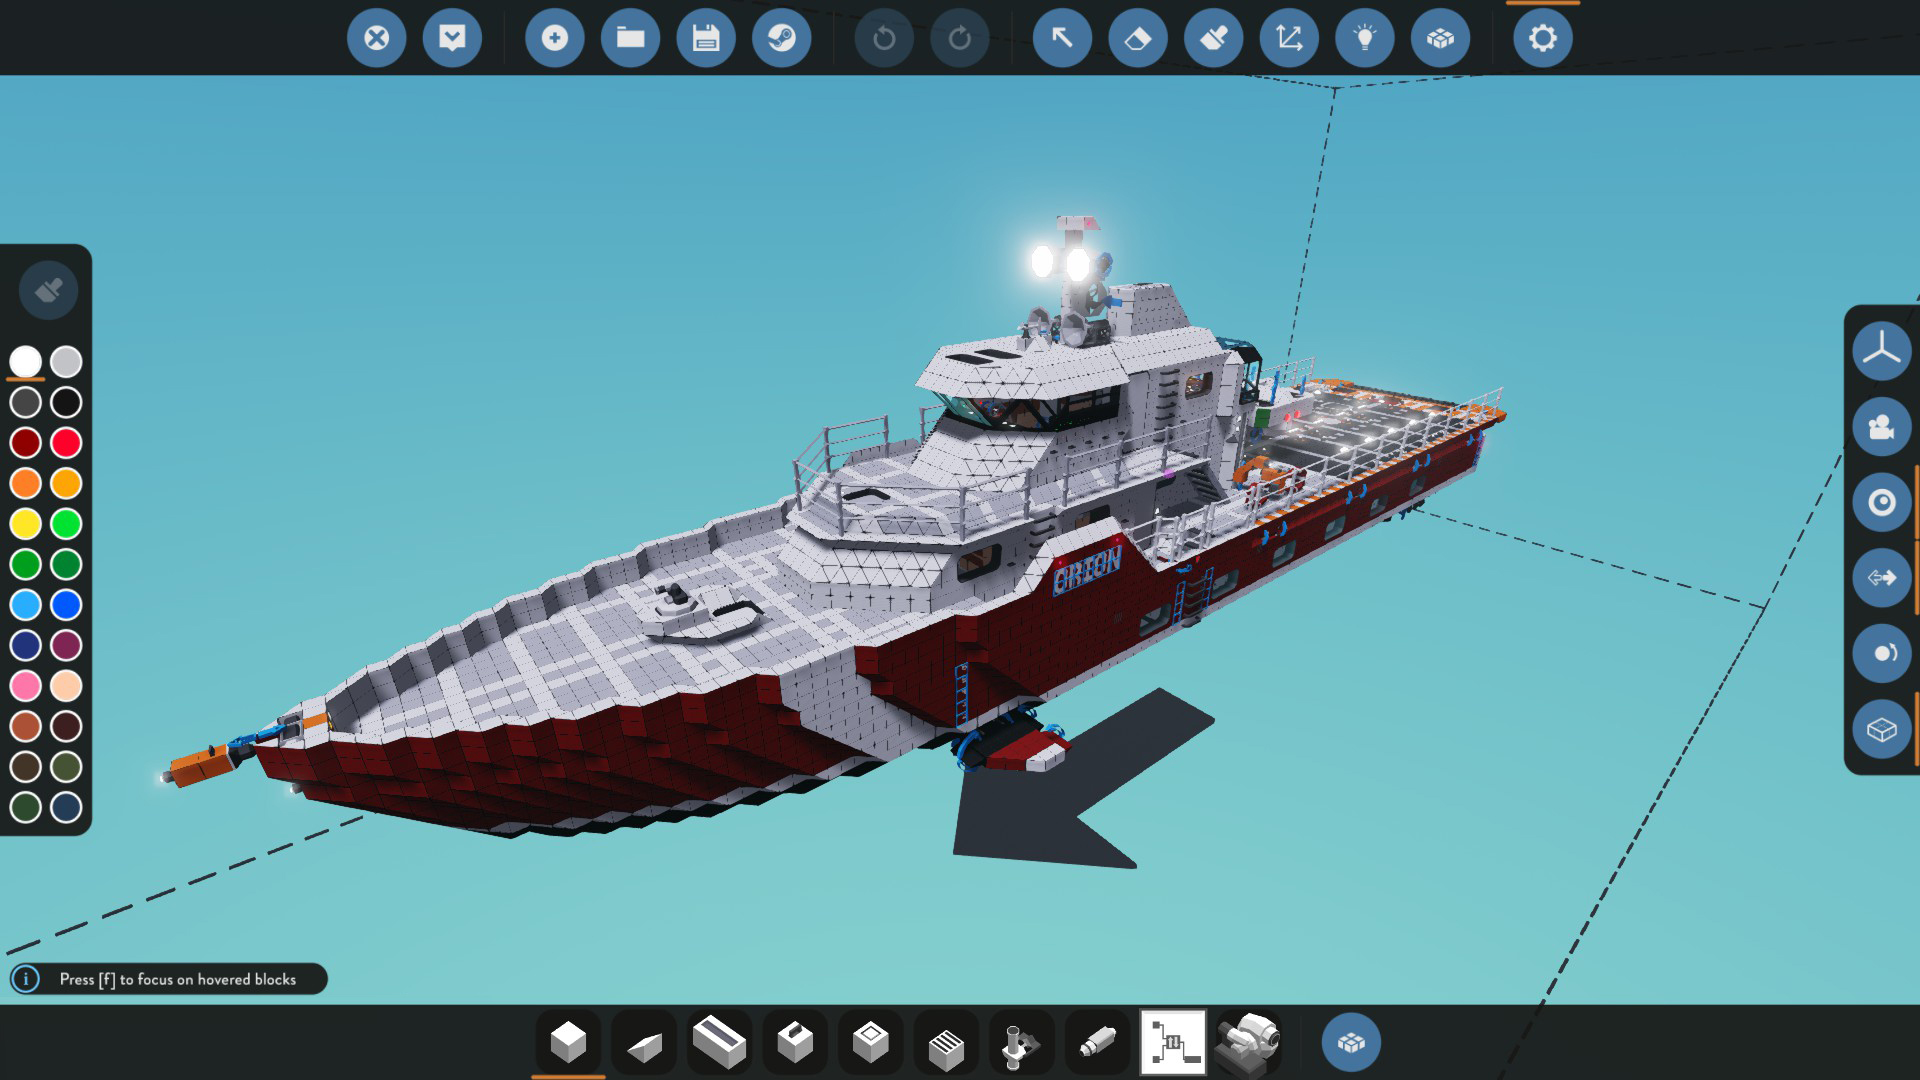 Stormworks Build And Rescue On Steam - build a boat survive in roblox we made a house boat